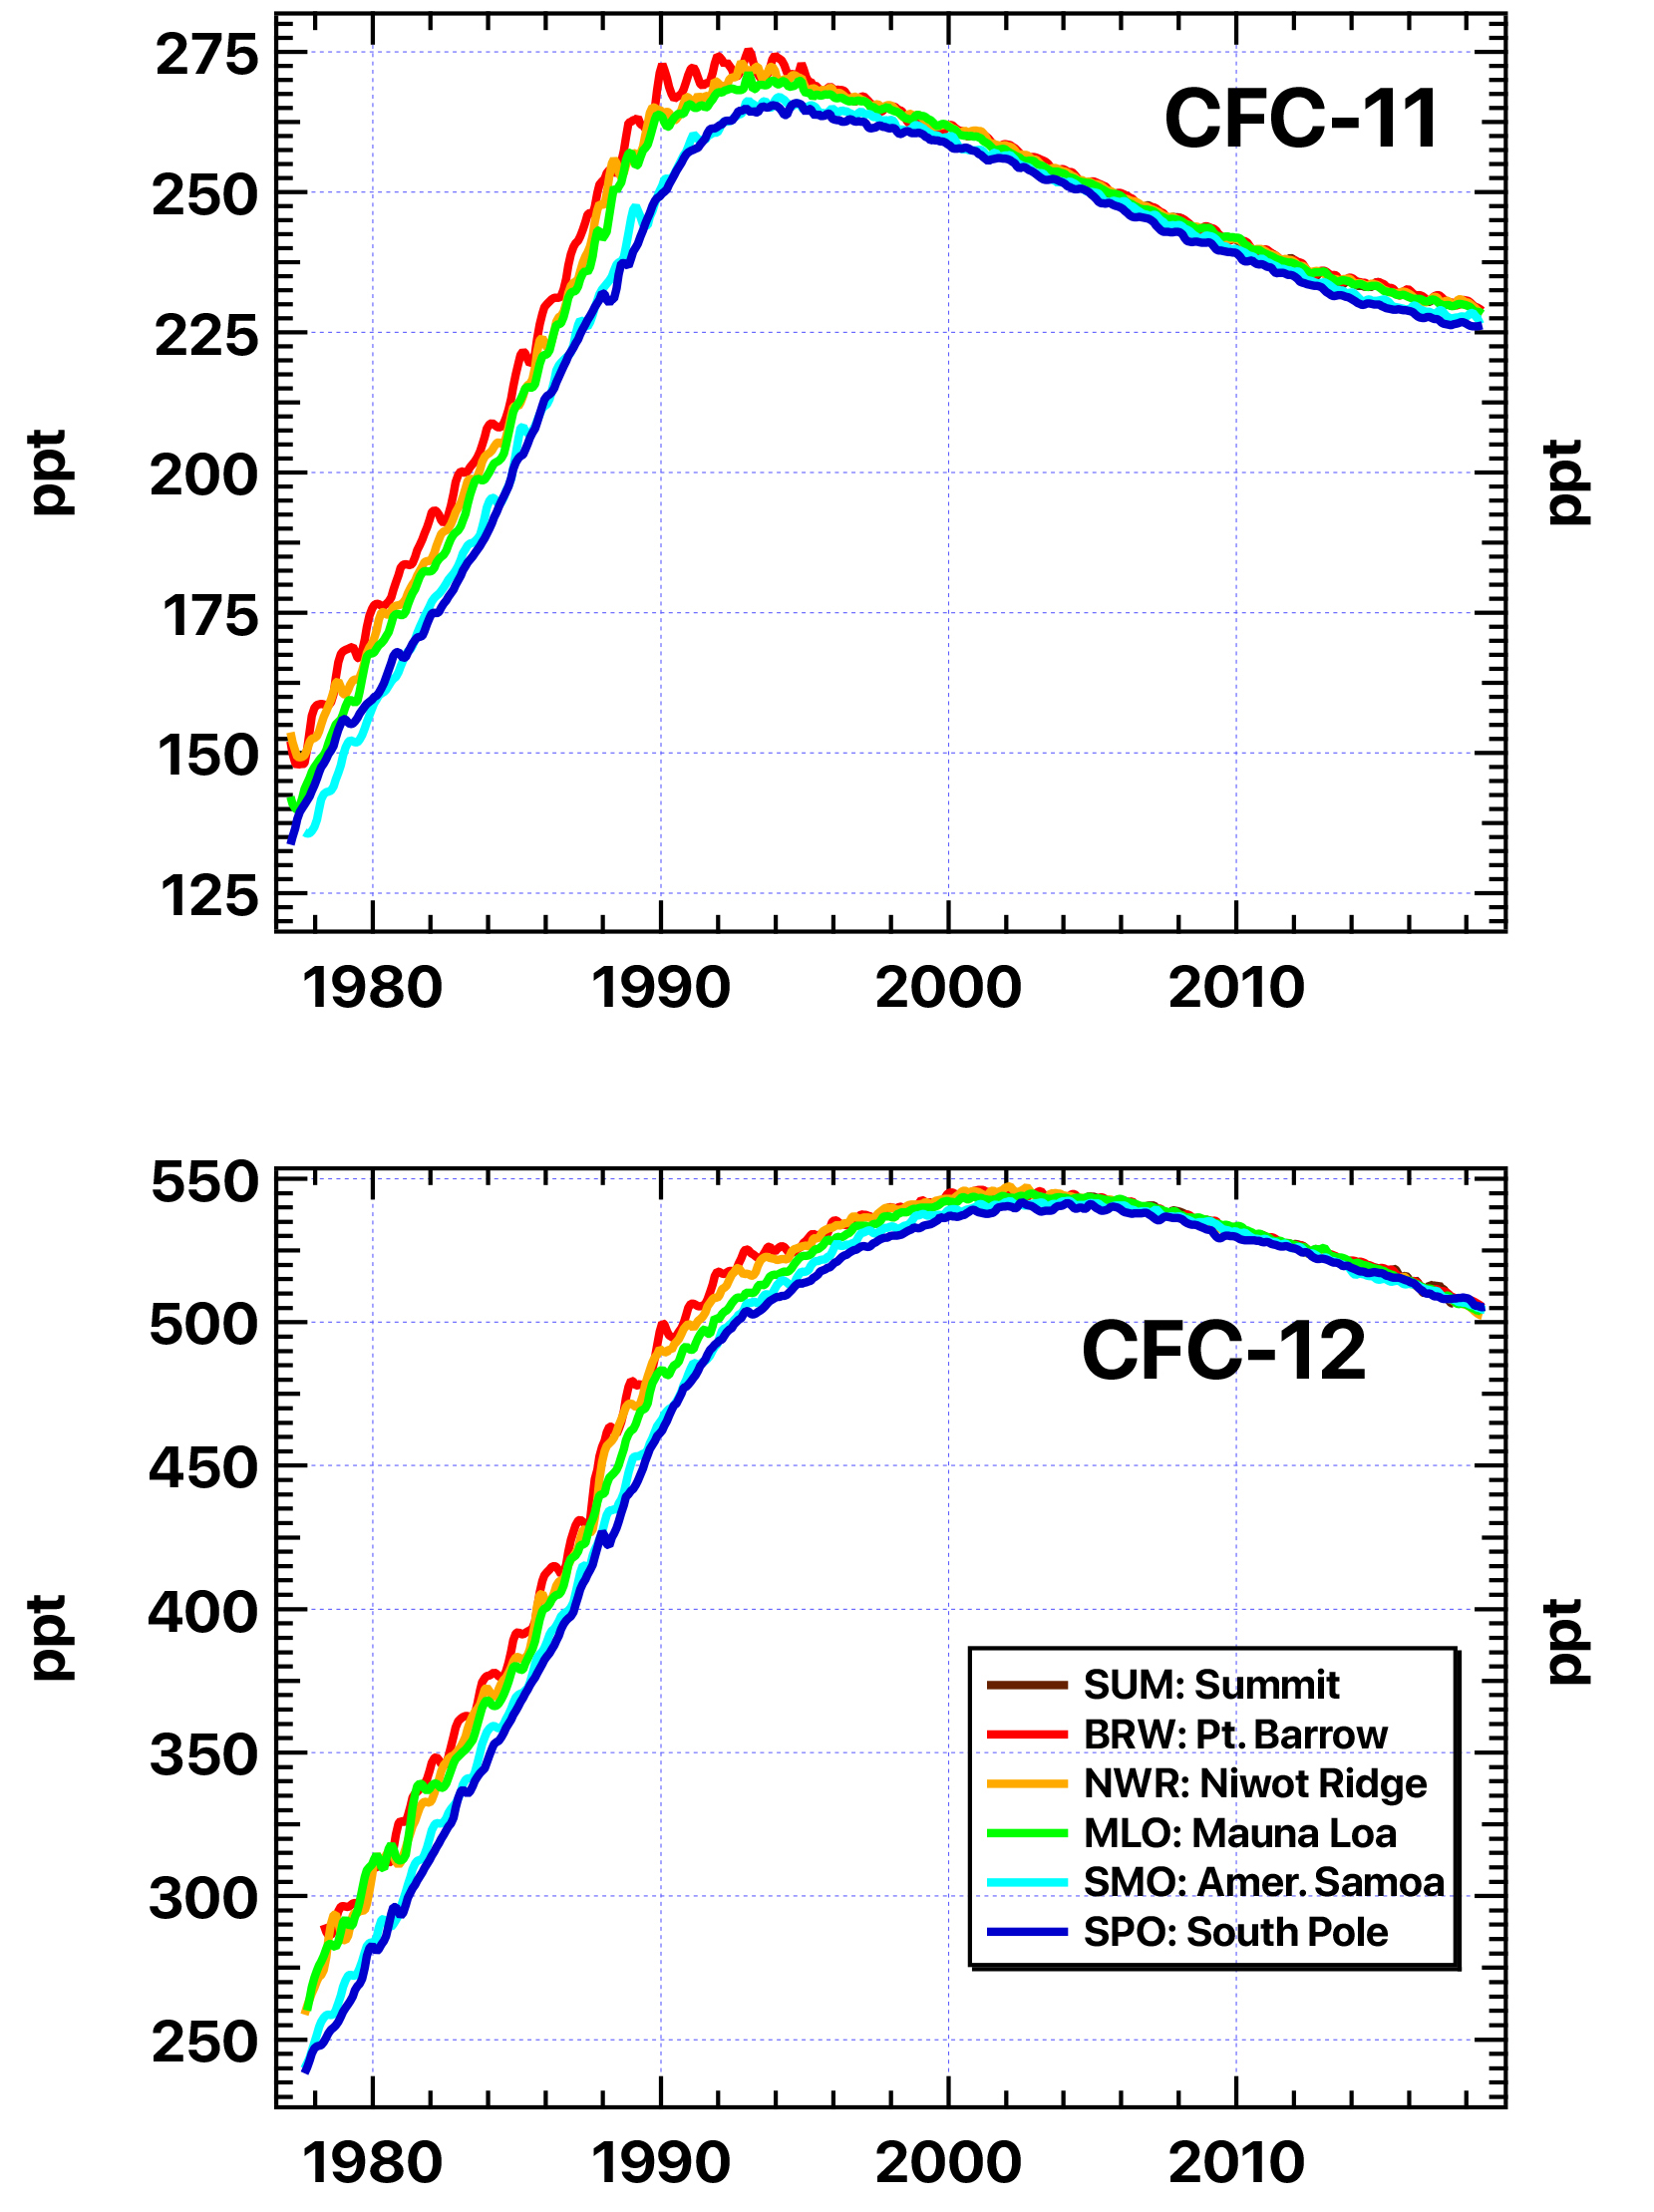 Barrow data (shown in red) are plotted with data from the other atmospheric baseline observatories and the Niwot Ridge, a long-term ecological research site in Colorado. Data show ozone-depleting gas concentrations rising until the Montreal Protocol restricted their use and production. For years, CFC concentrations at Barrow and other sites have steadily decreased as a result of this international agreement.